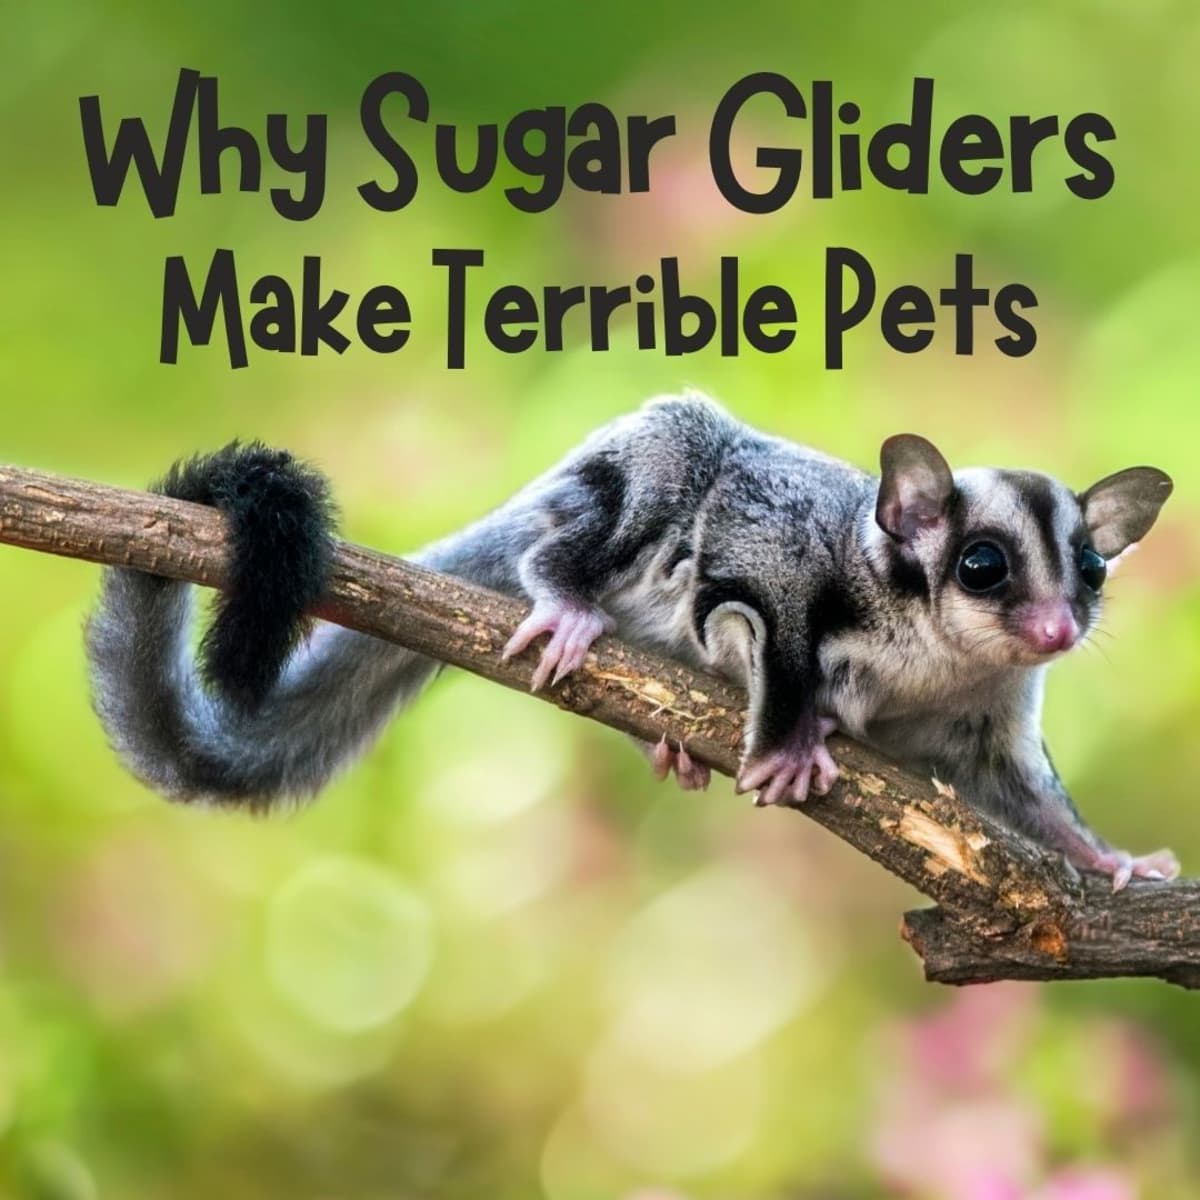 10 Reasons Why Sugar Gliders Should Not Be Kept as Pets - PetHelpful